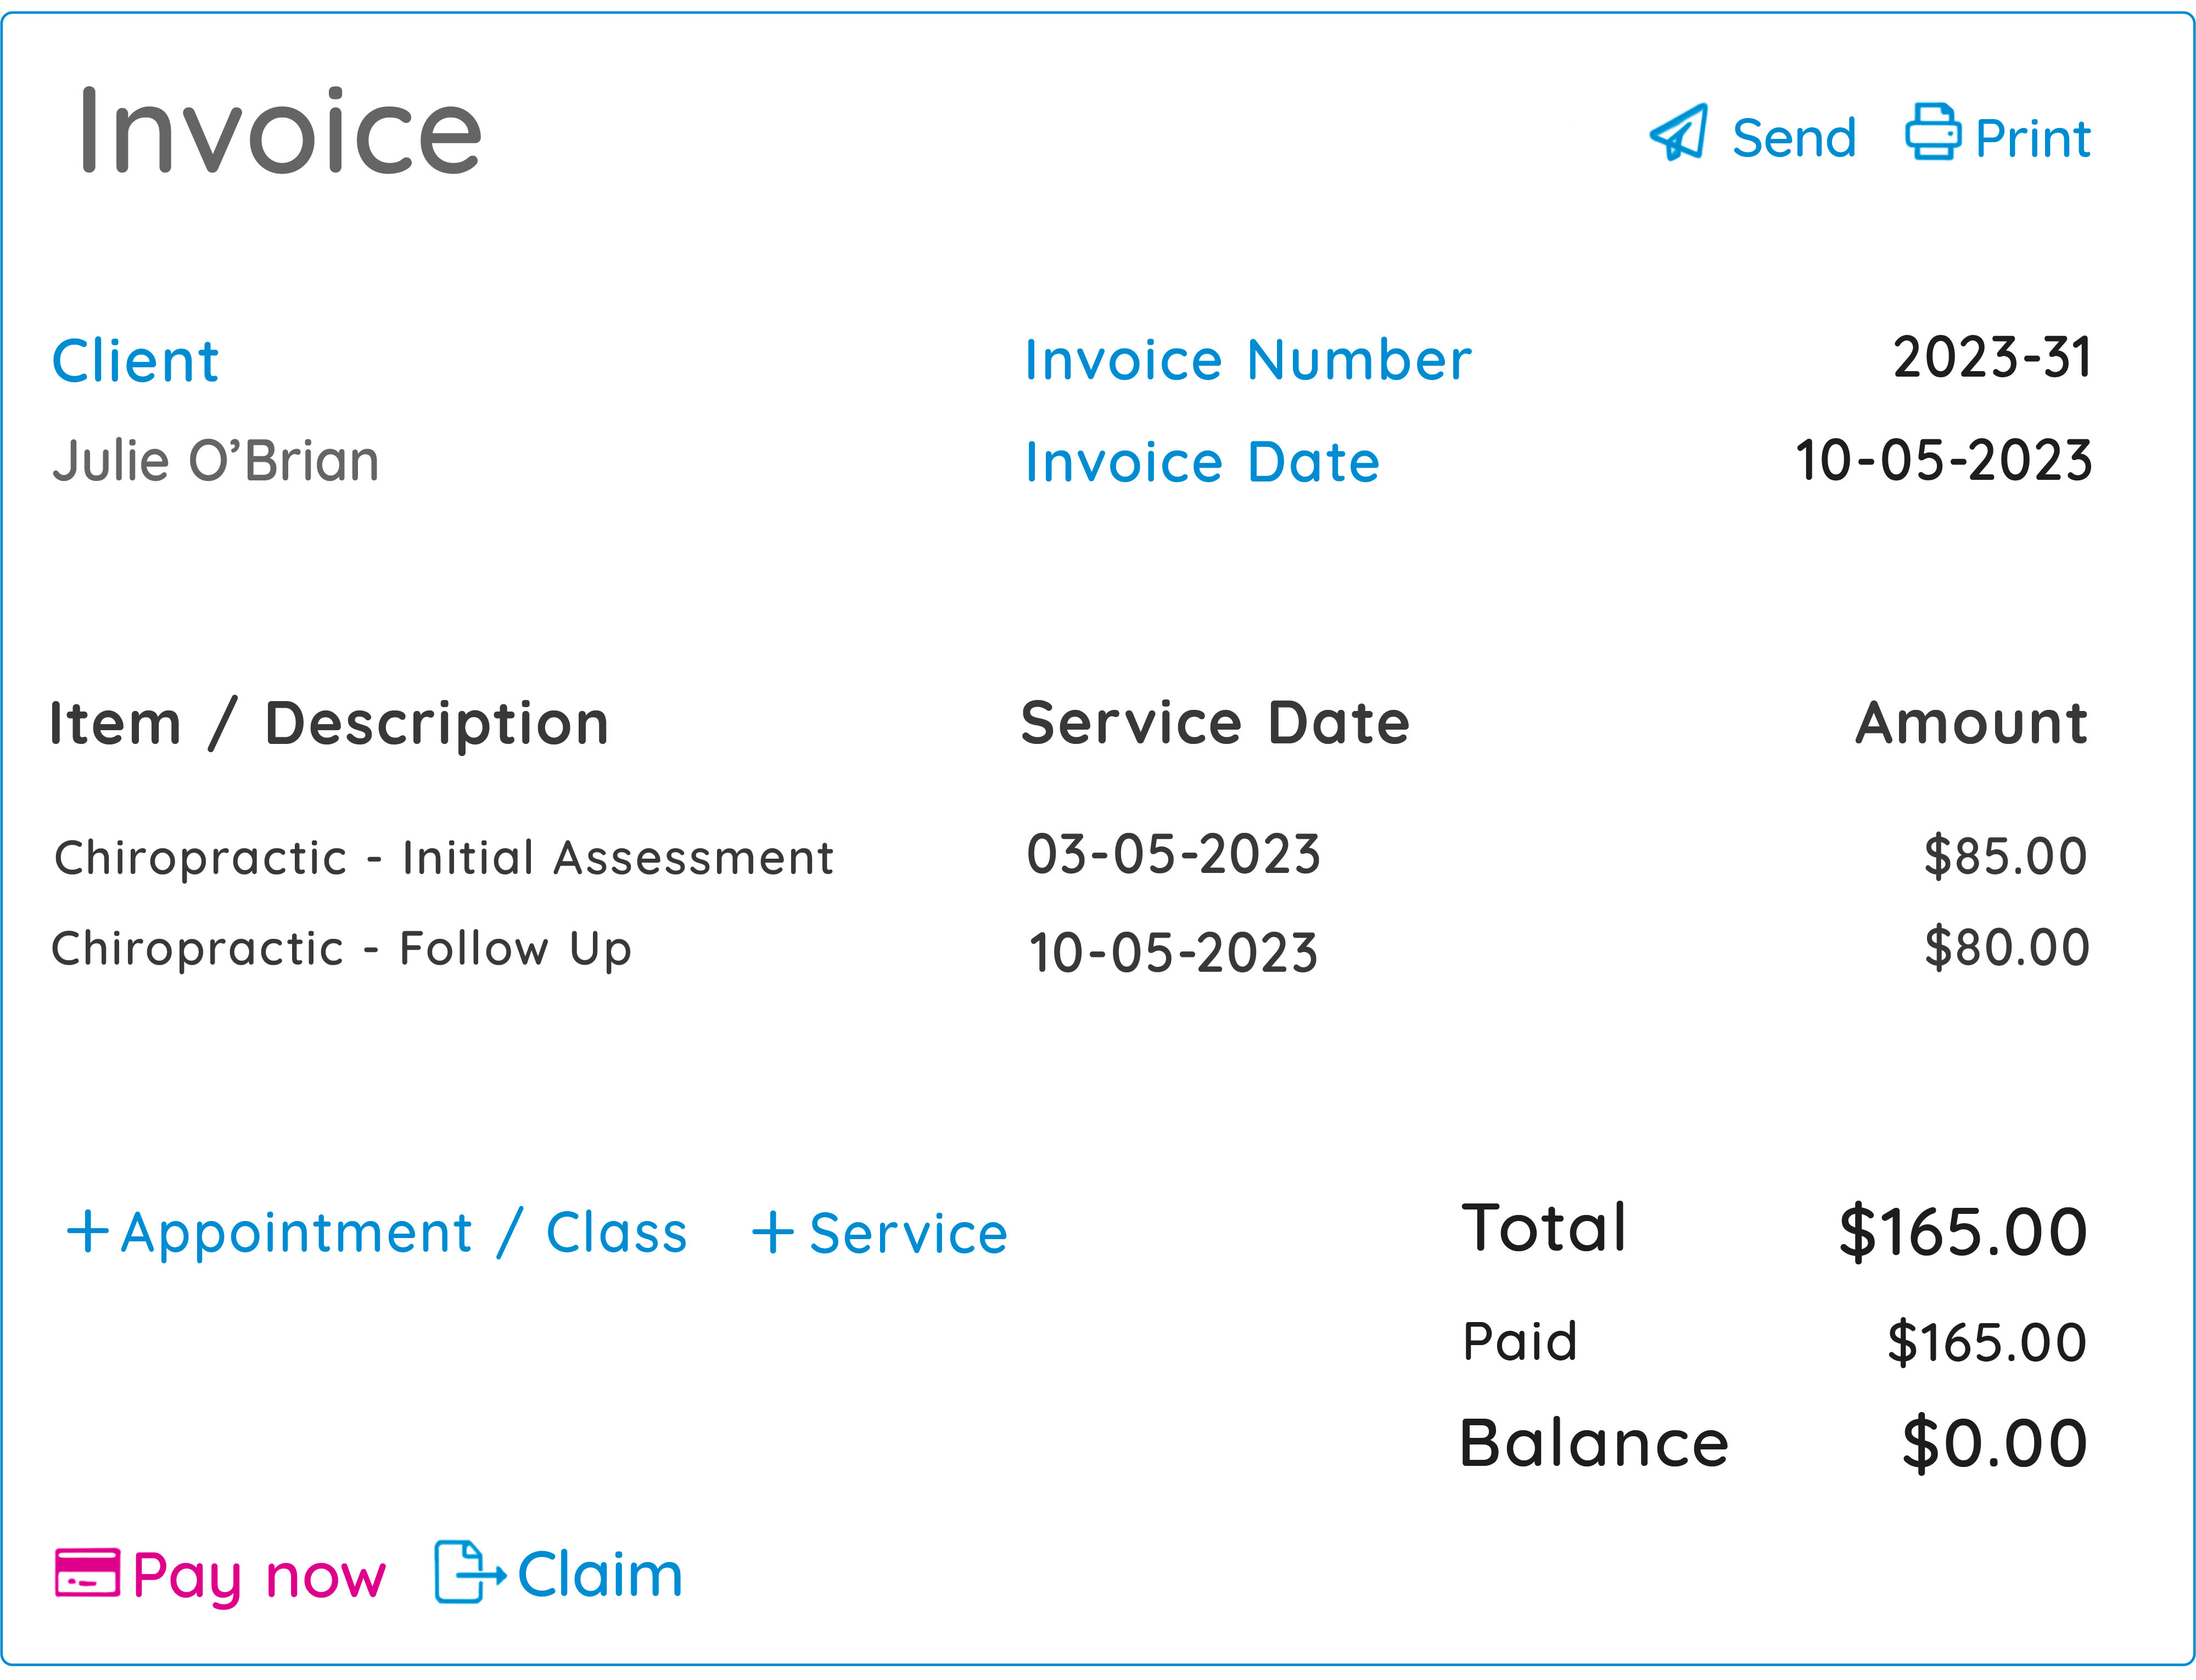 A GOrendezvous invoice for services rendered by a chiropractor